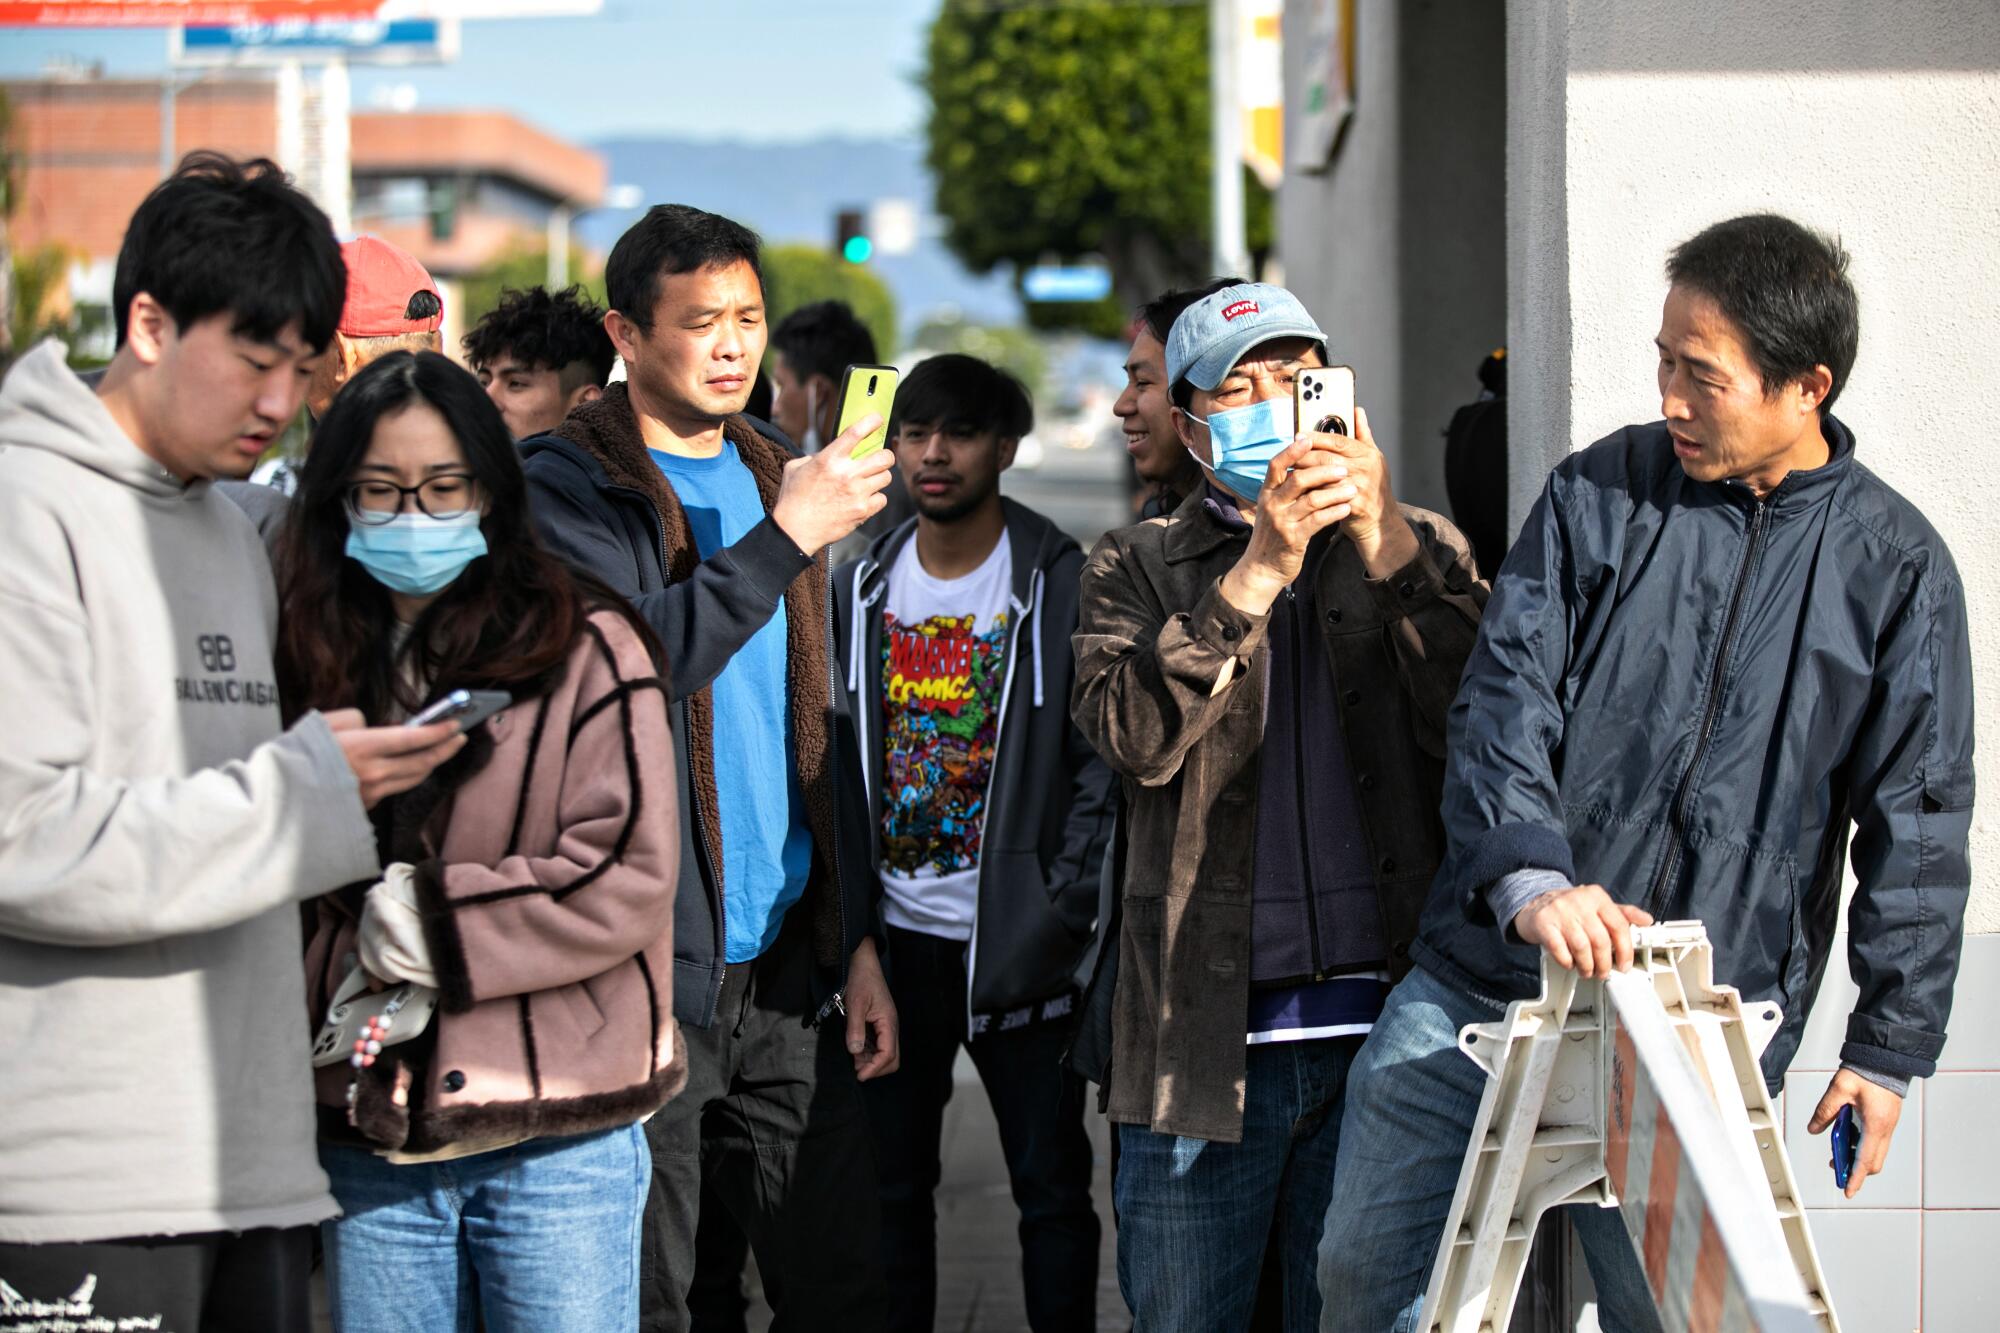 A small group of people stands on a street, some having their phones out as if recording.